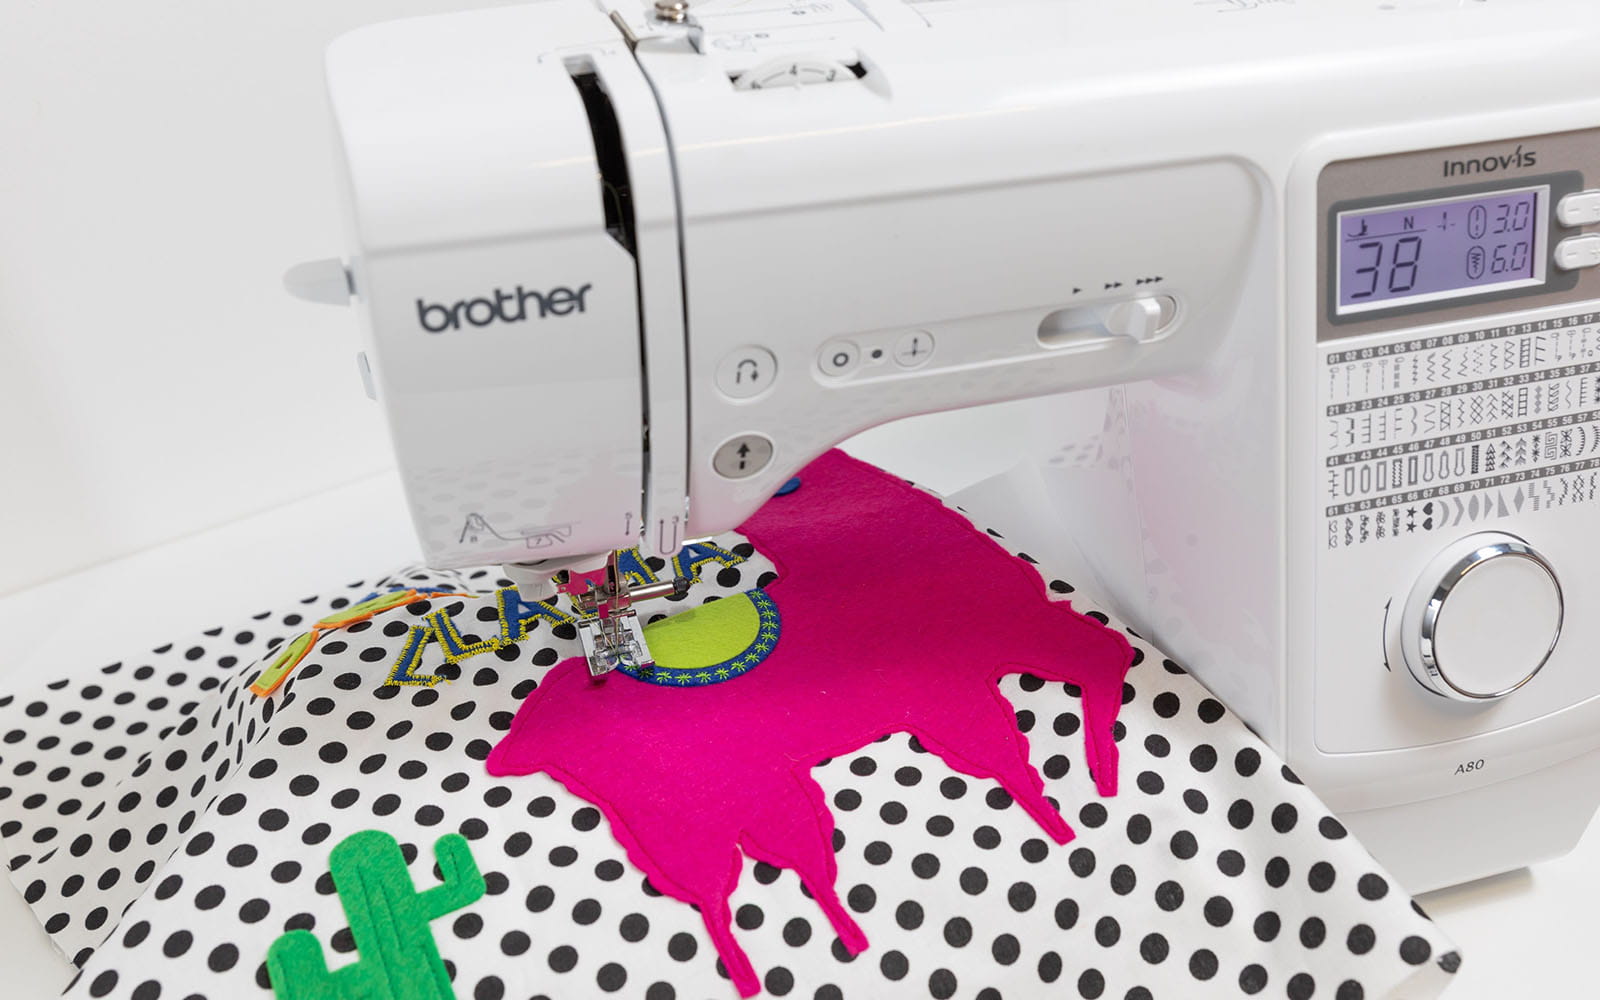 Spotty cushion cover with pink llama appliqué on Brother sewing machine